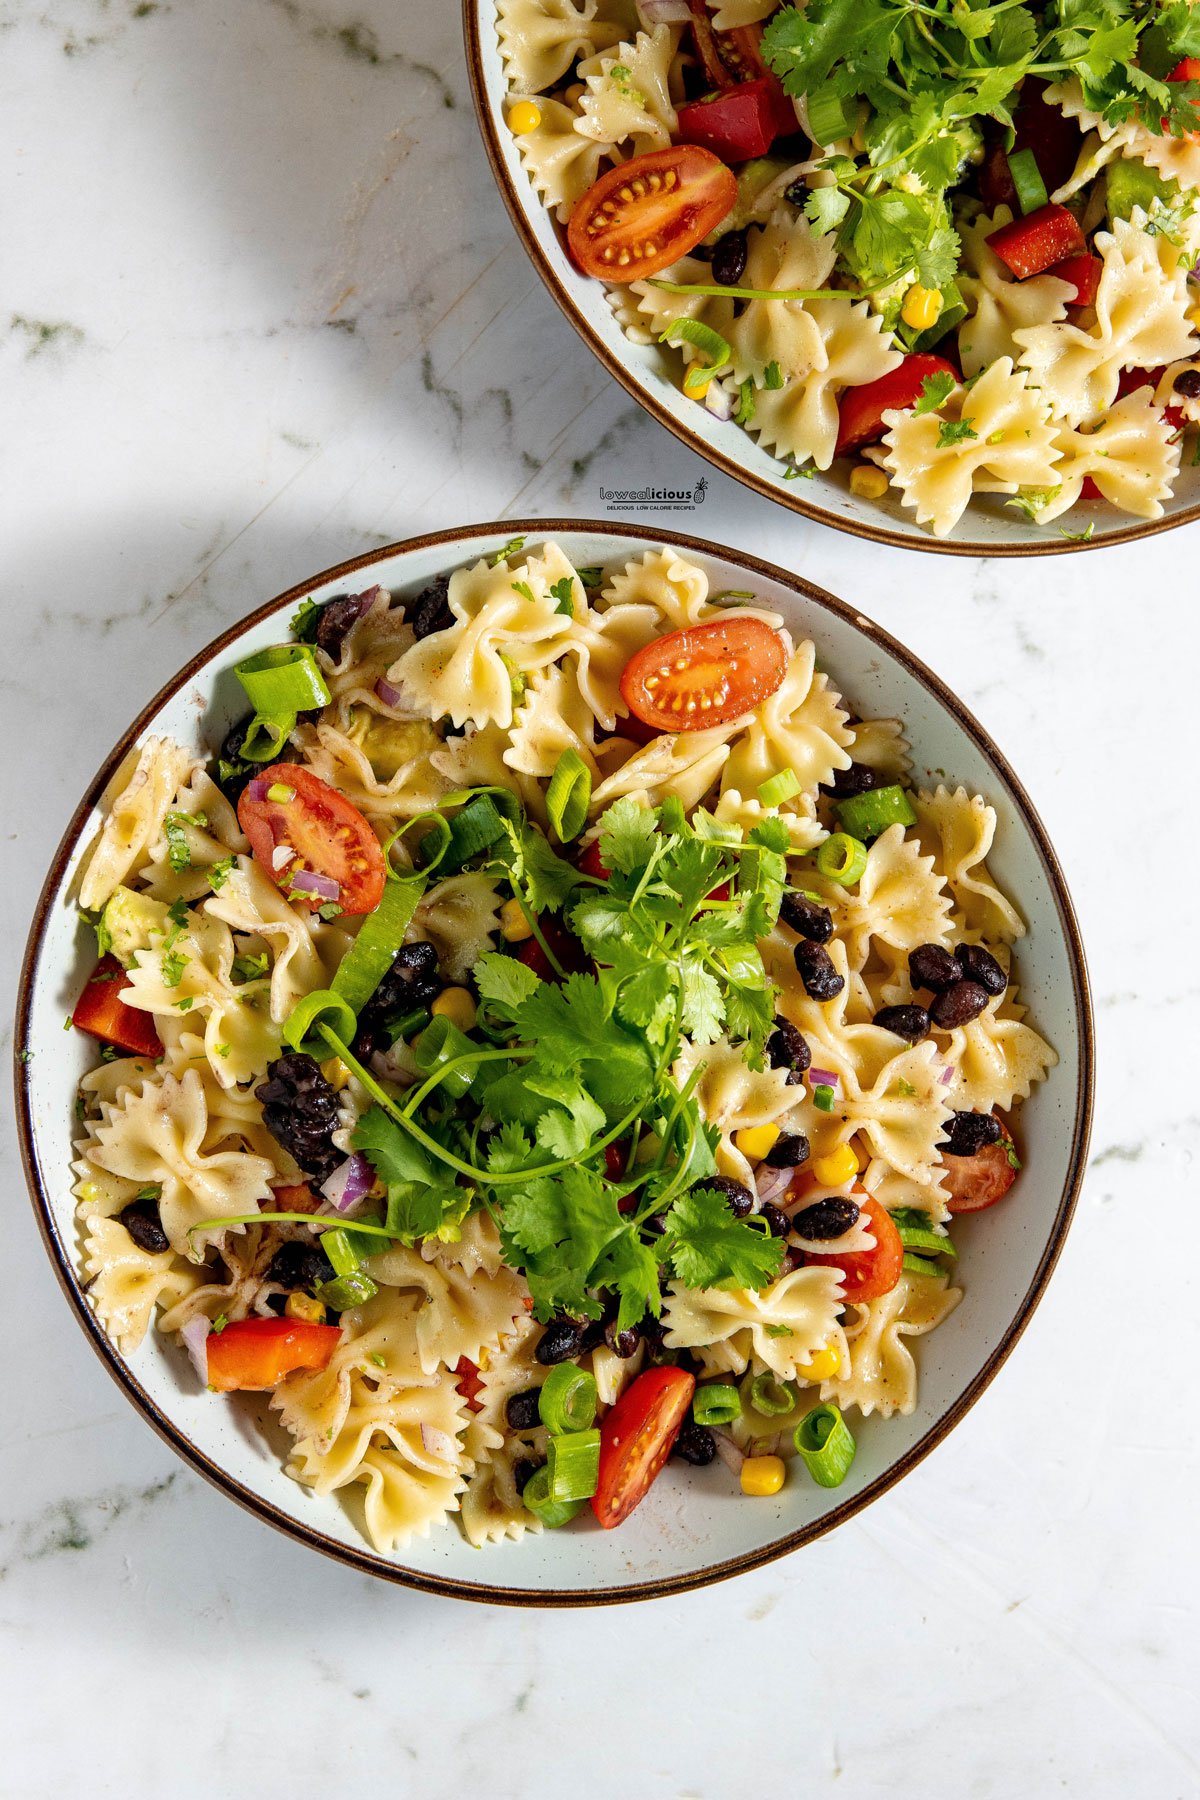 Healthy Southwest Pasta Salad recipe (Vegan) in white serving bowls with brown rim garnished with fresh cilantro